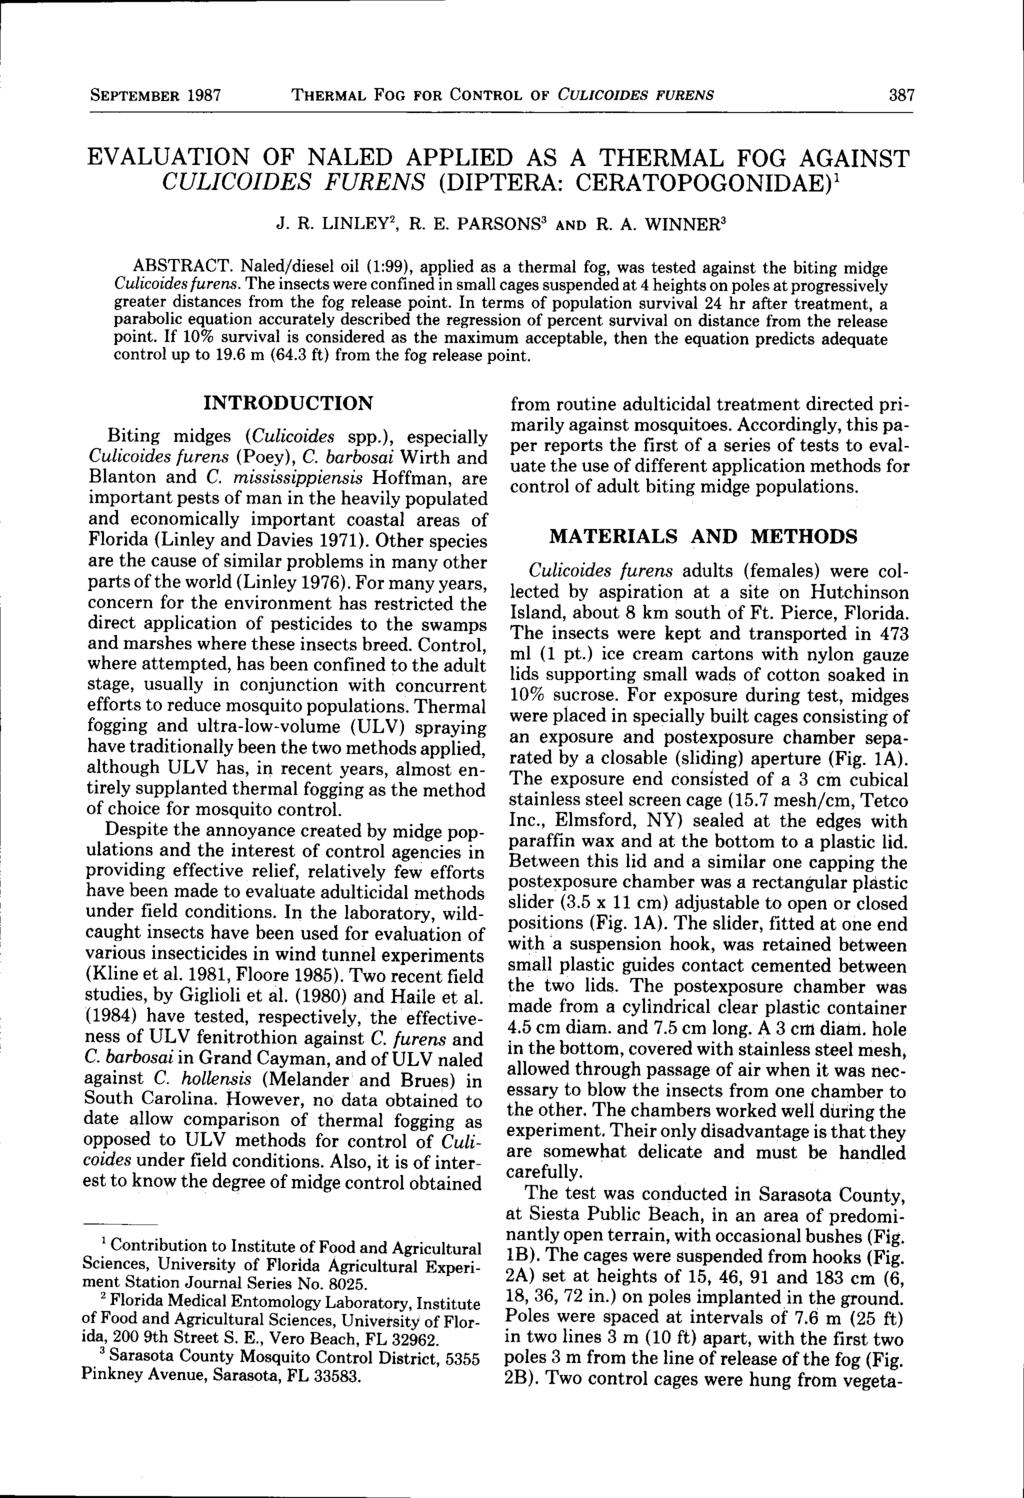 SEPTEMBER 1987 THERMAL Foc FoR Coxrnol or Cuttconns FURENS 387 EVALUATION OF NALED APPLIED AS A THERMAL FOG AGAINST CUUCOIDES FURENS (DIPTERA: CERATOPOGONIDAE)1 J. R. LINLEY2, R. E. PARSONS3 rro R. A. WINNER3 - ABSTRACT.